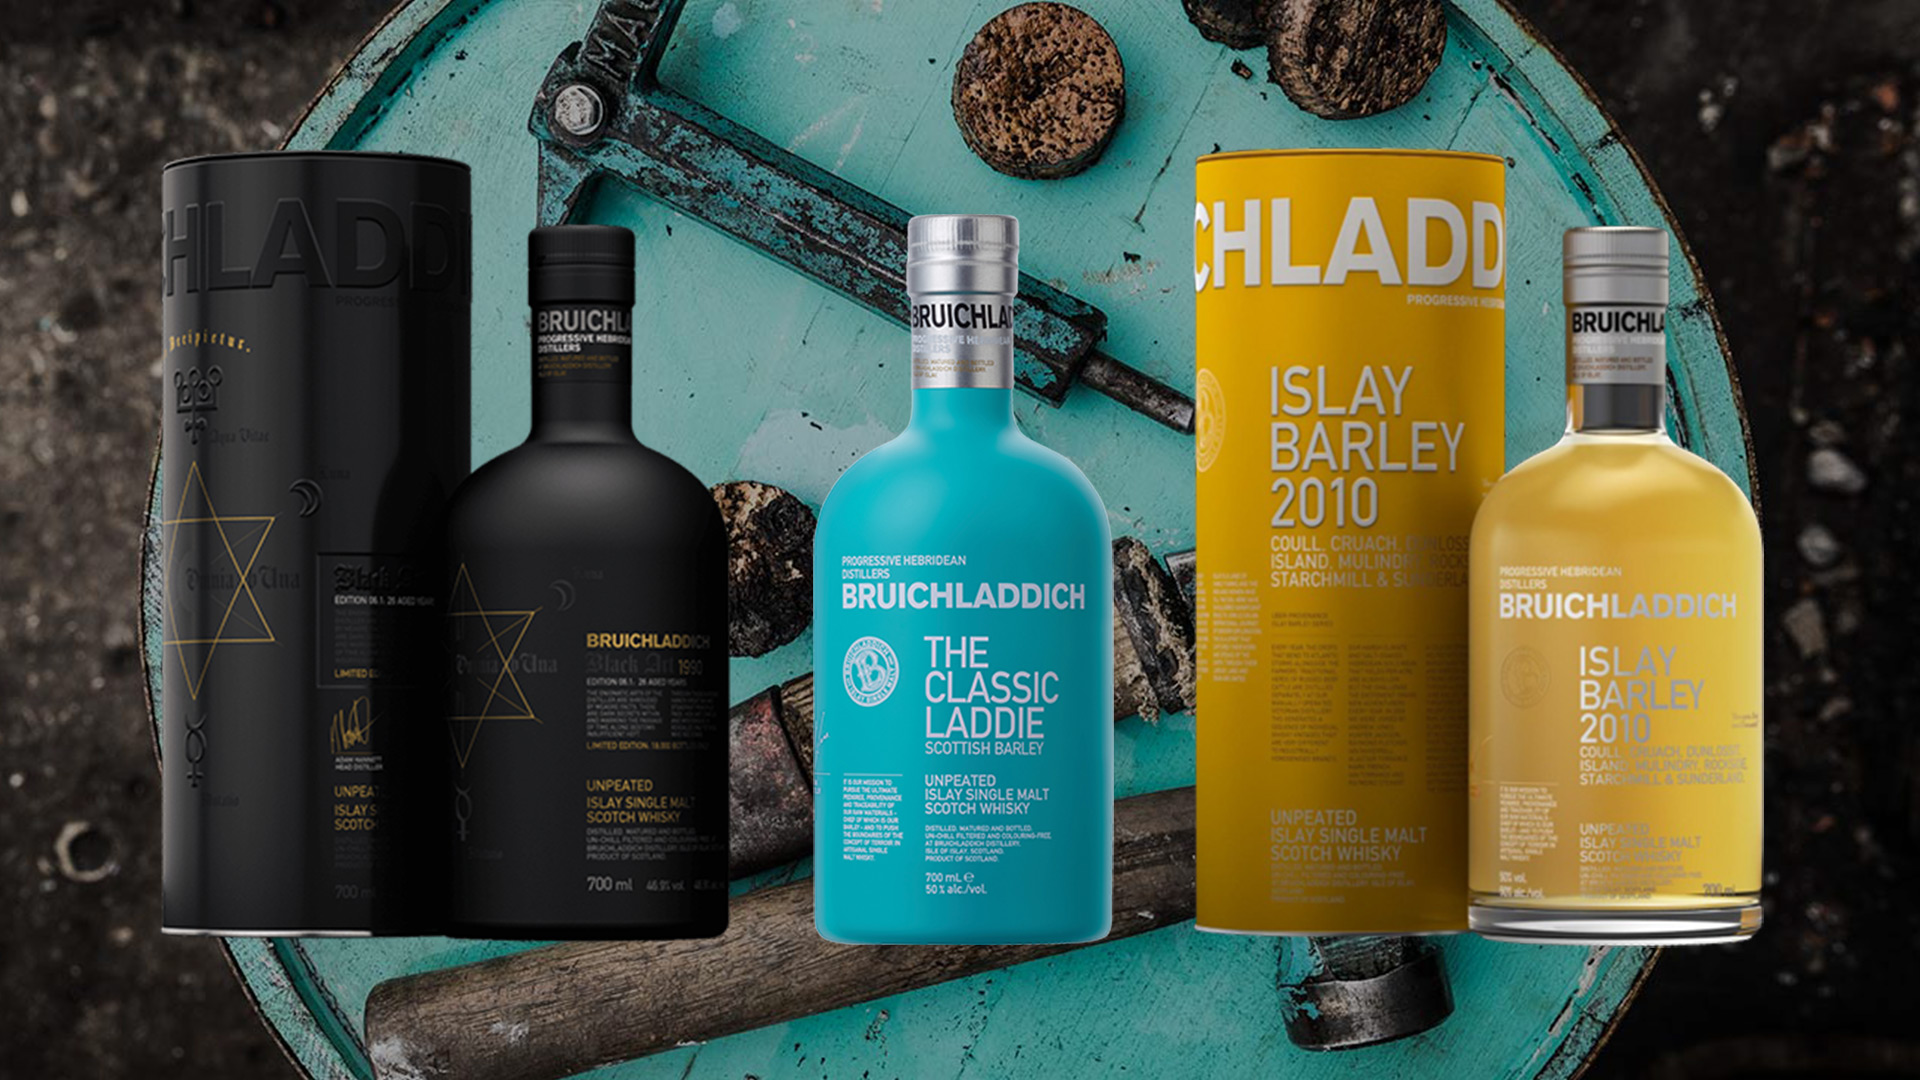 We Find The Four Best Whiskies From Bruichladdich